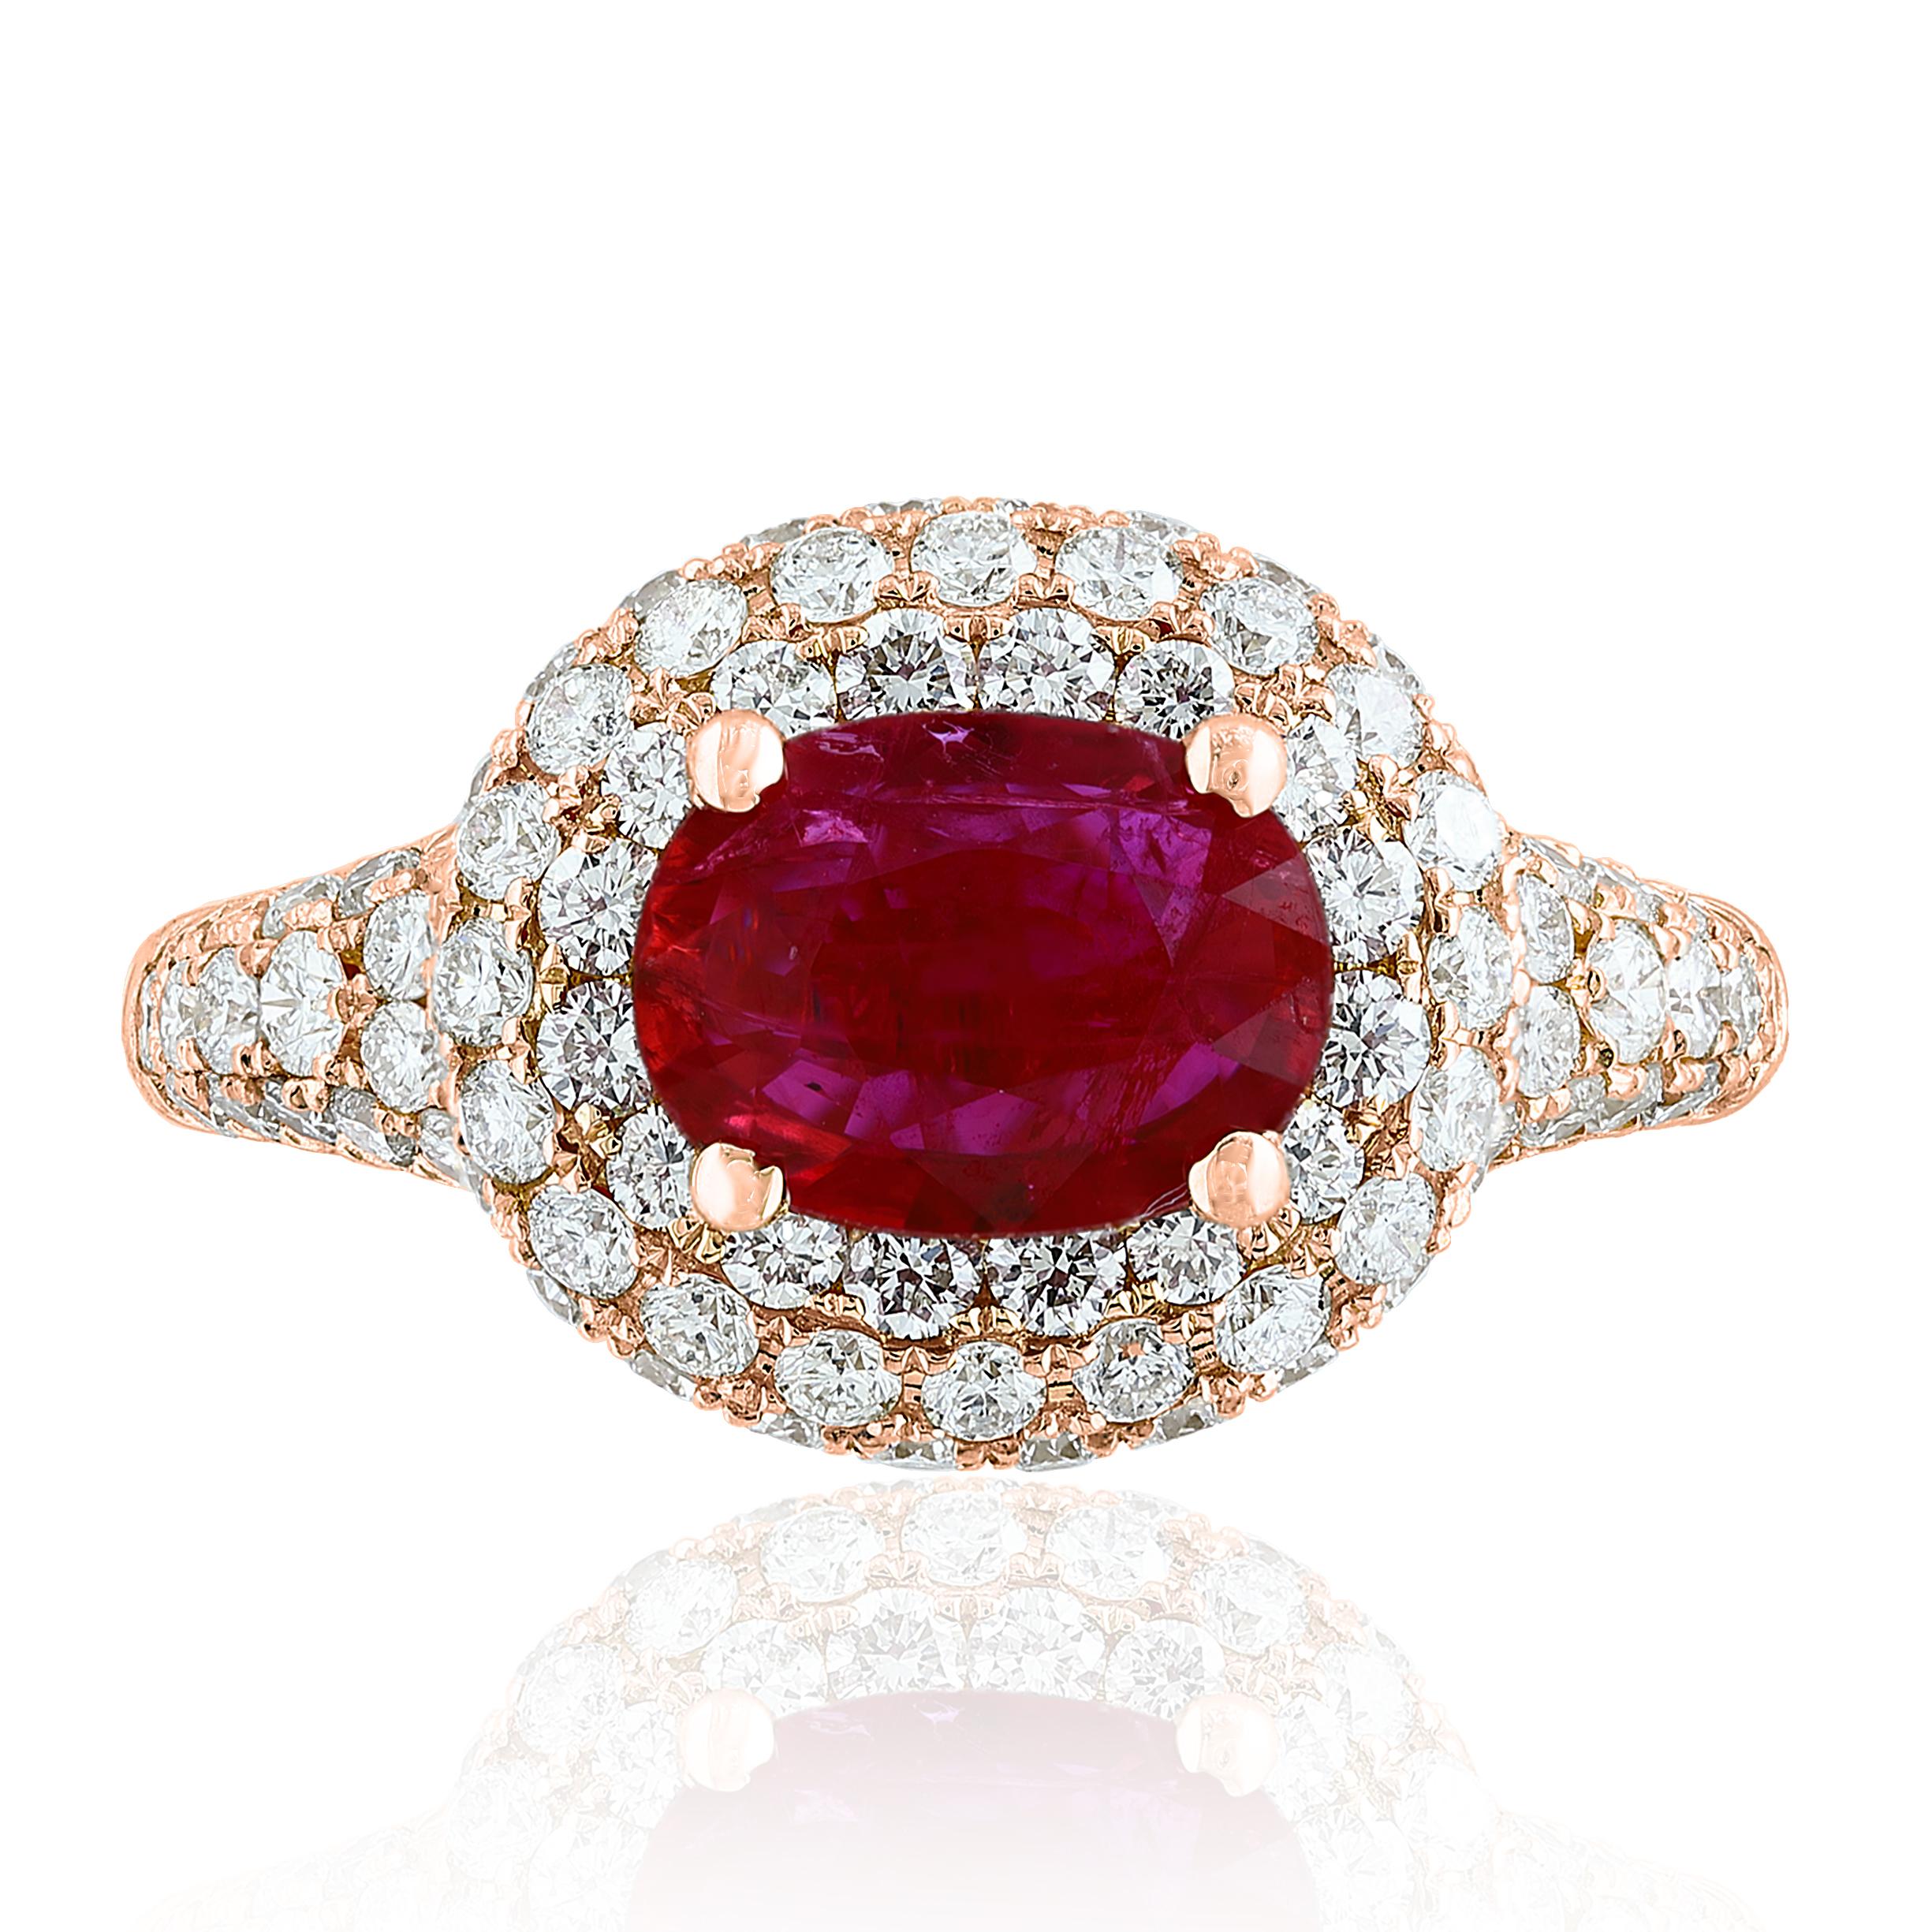 A uniquely-designed ring showcasing a 1.26 Carat Oval Cut Ruby surrounding the center stone are brilliant-cut round diamonds in an 18 karat rose gold mounting. 124 diamonds weigh 1.67 carats in total.